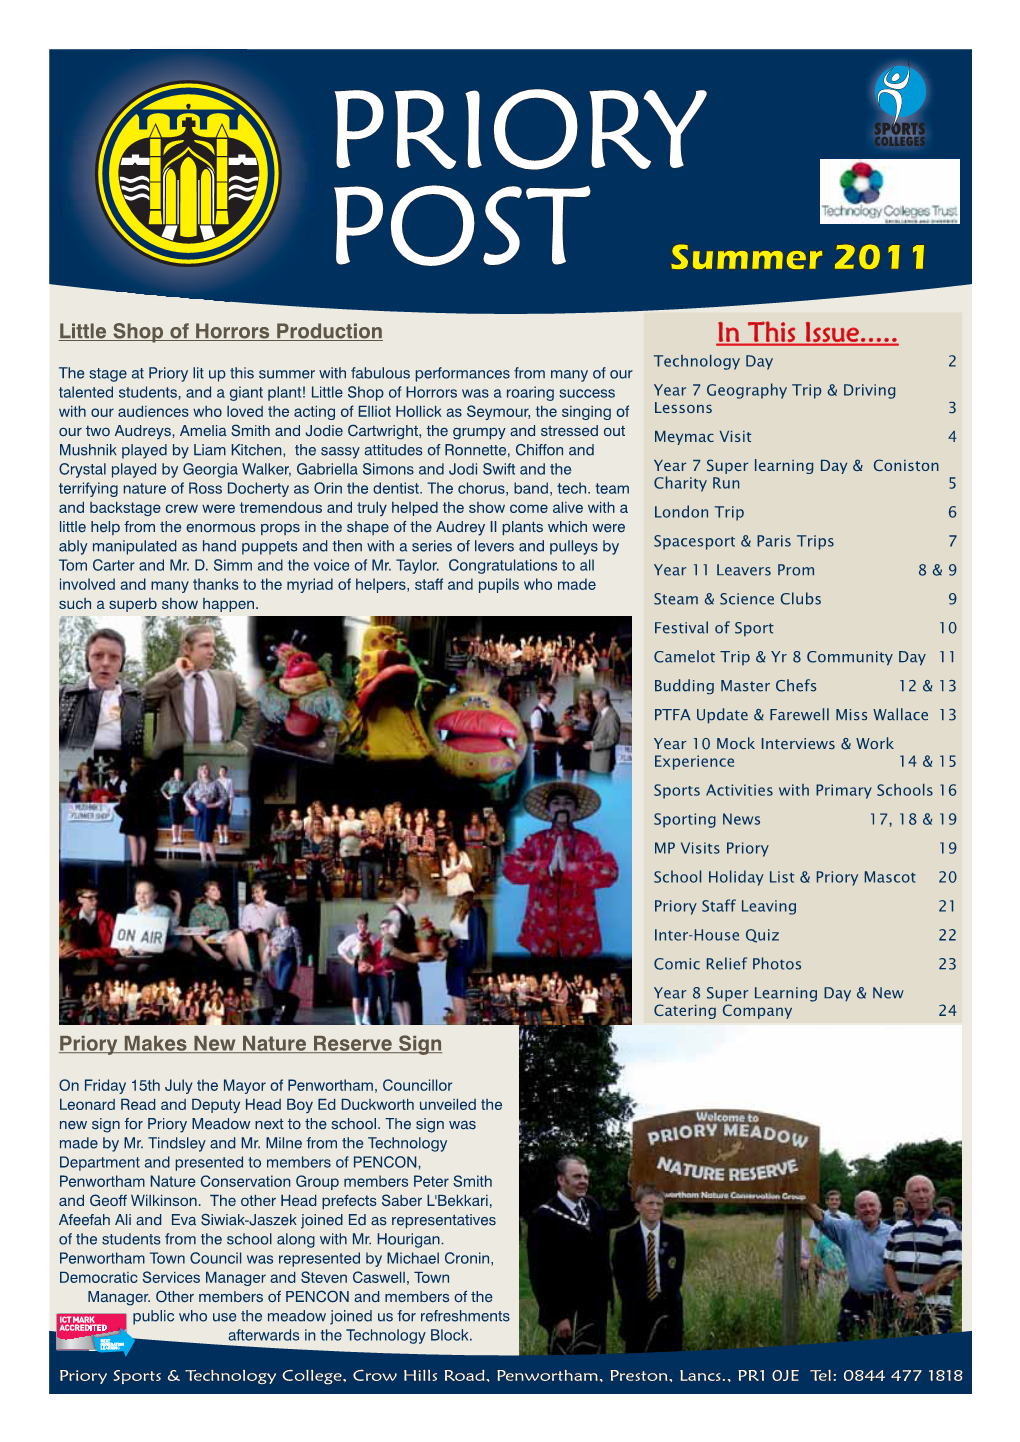 PRIORY POST Summer 2011